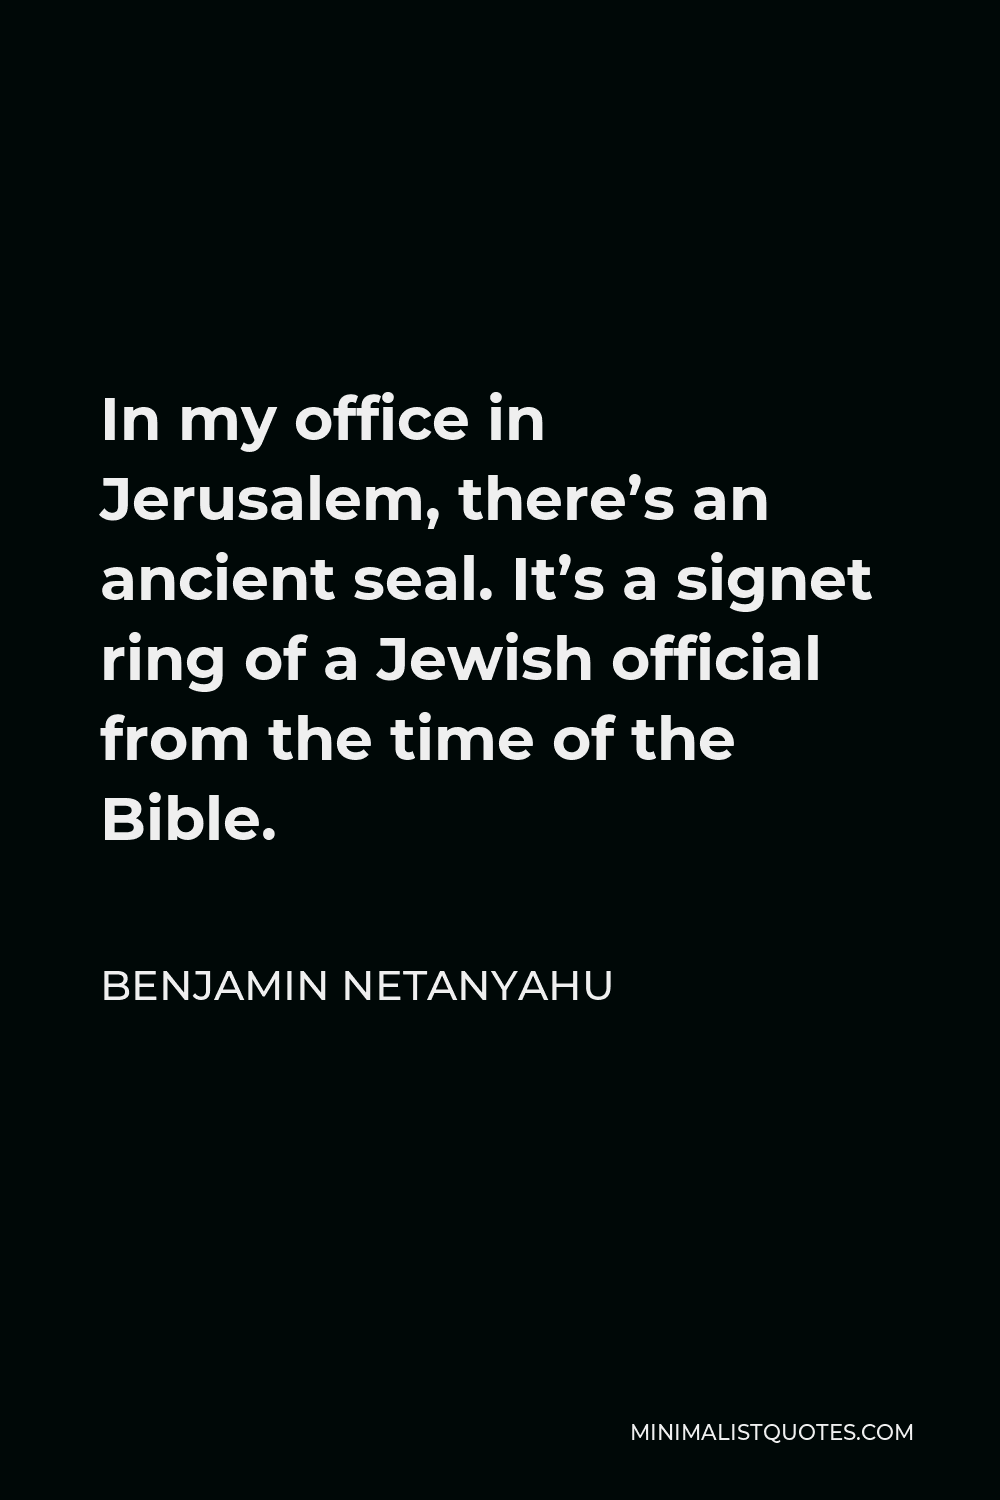 Benjamin Netanyahu Quote - In my office in Jerusalem, there’s an ancient seal. It’s a signet ring of a Jewish official from the time of the Bible.